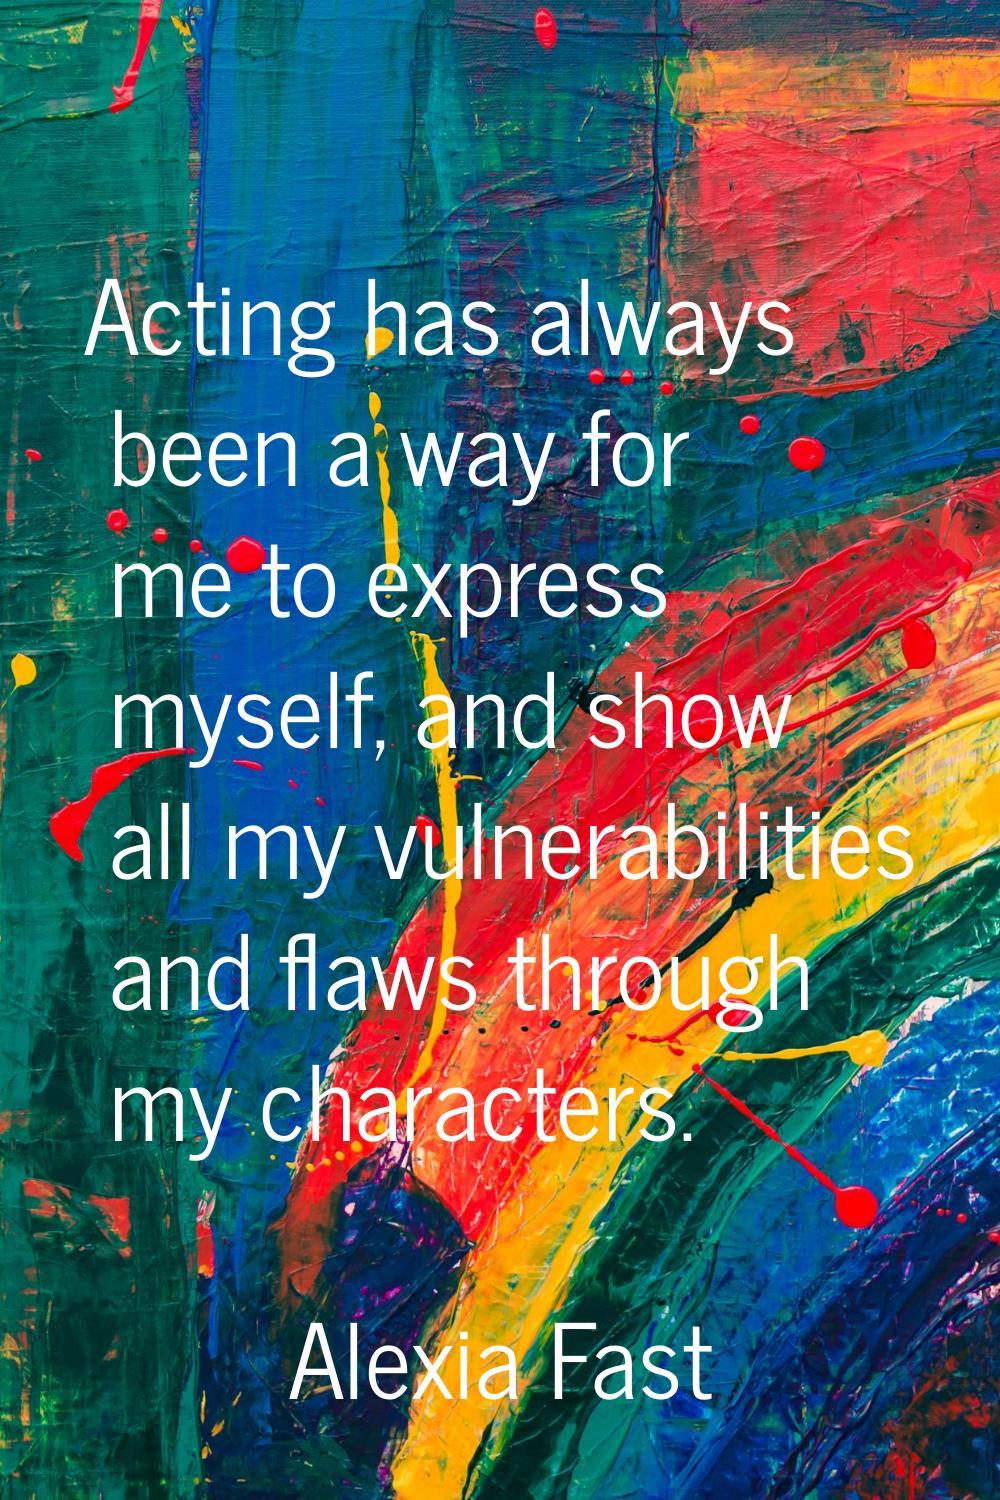 Acting has always been a way for me to express myself, and show all my vulnerabilities and flaws th